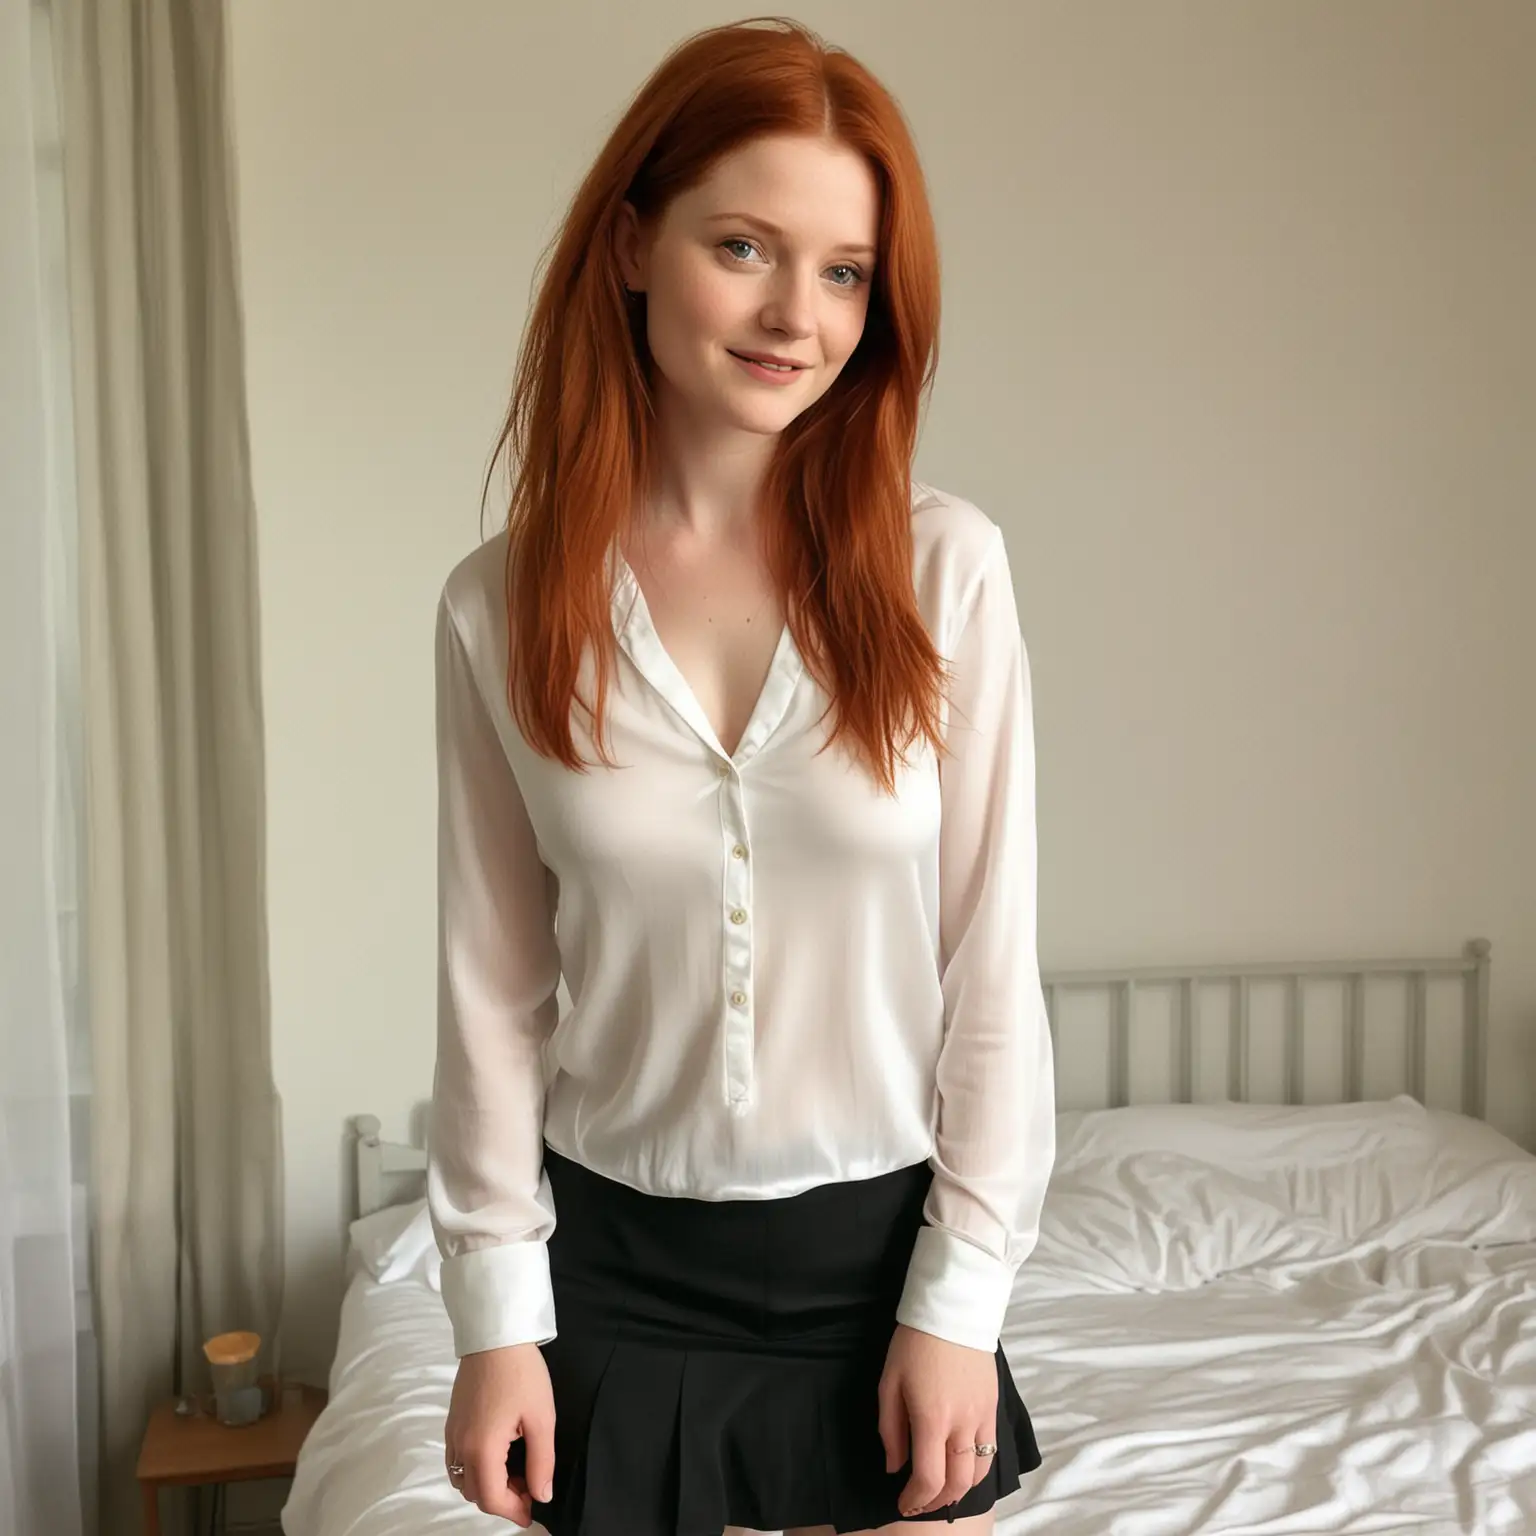 Bonnie Wright Smiling in Ivory Silk Shirt and Black Skirt